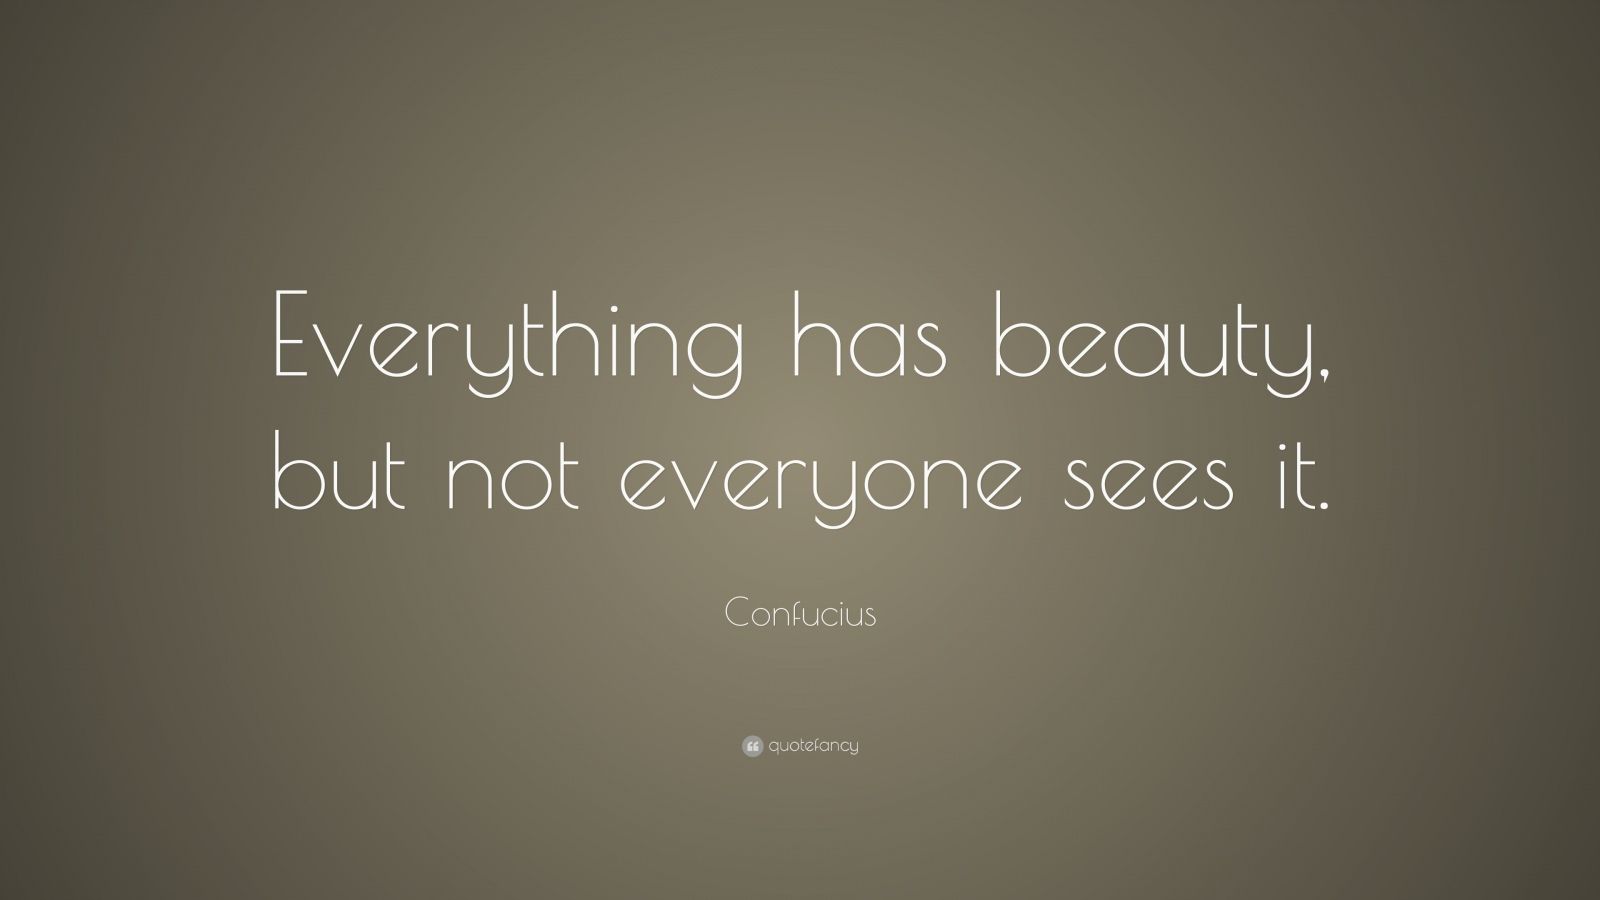 confucius quotes everything has beauty